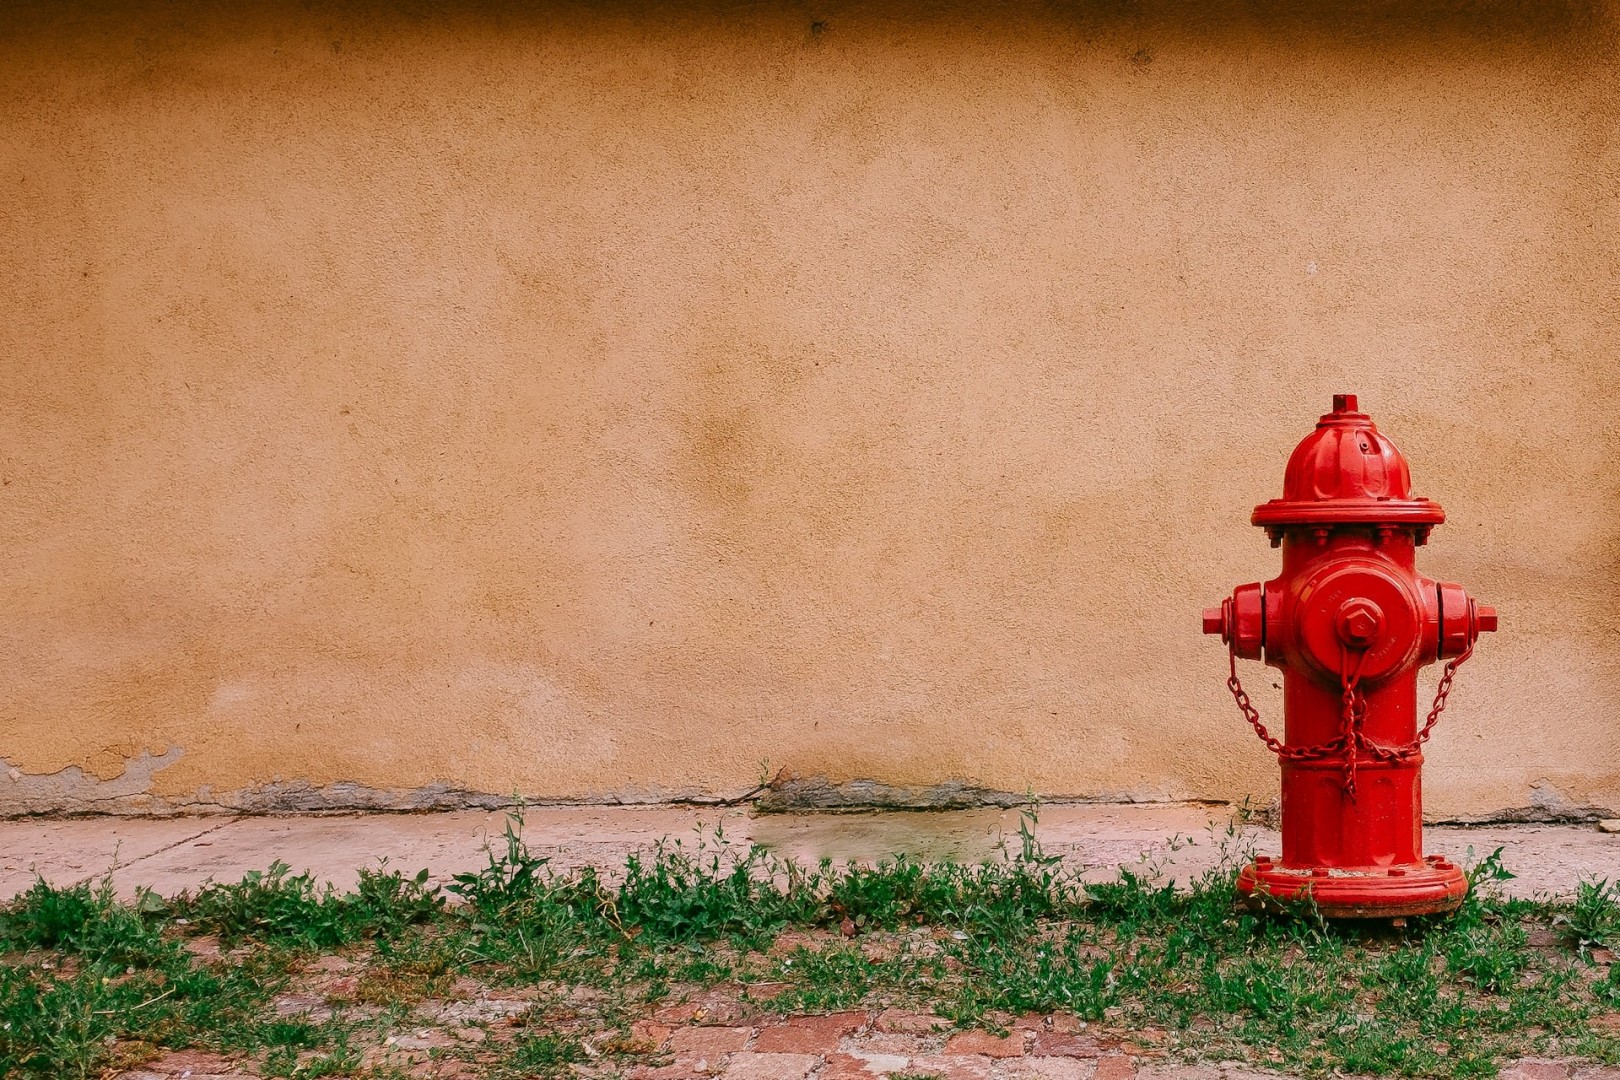 water treatment plant pumps; a fire hydrant